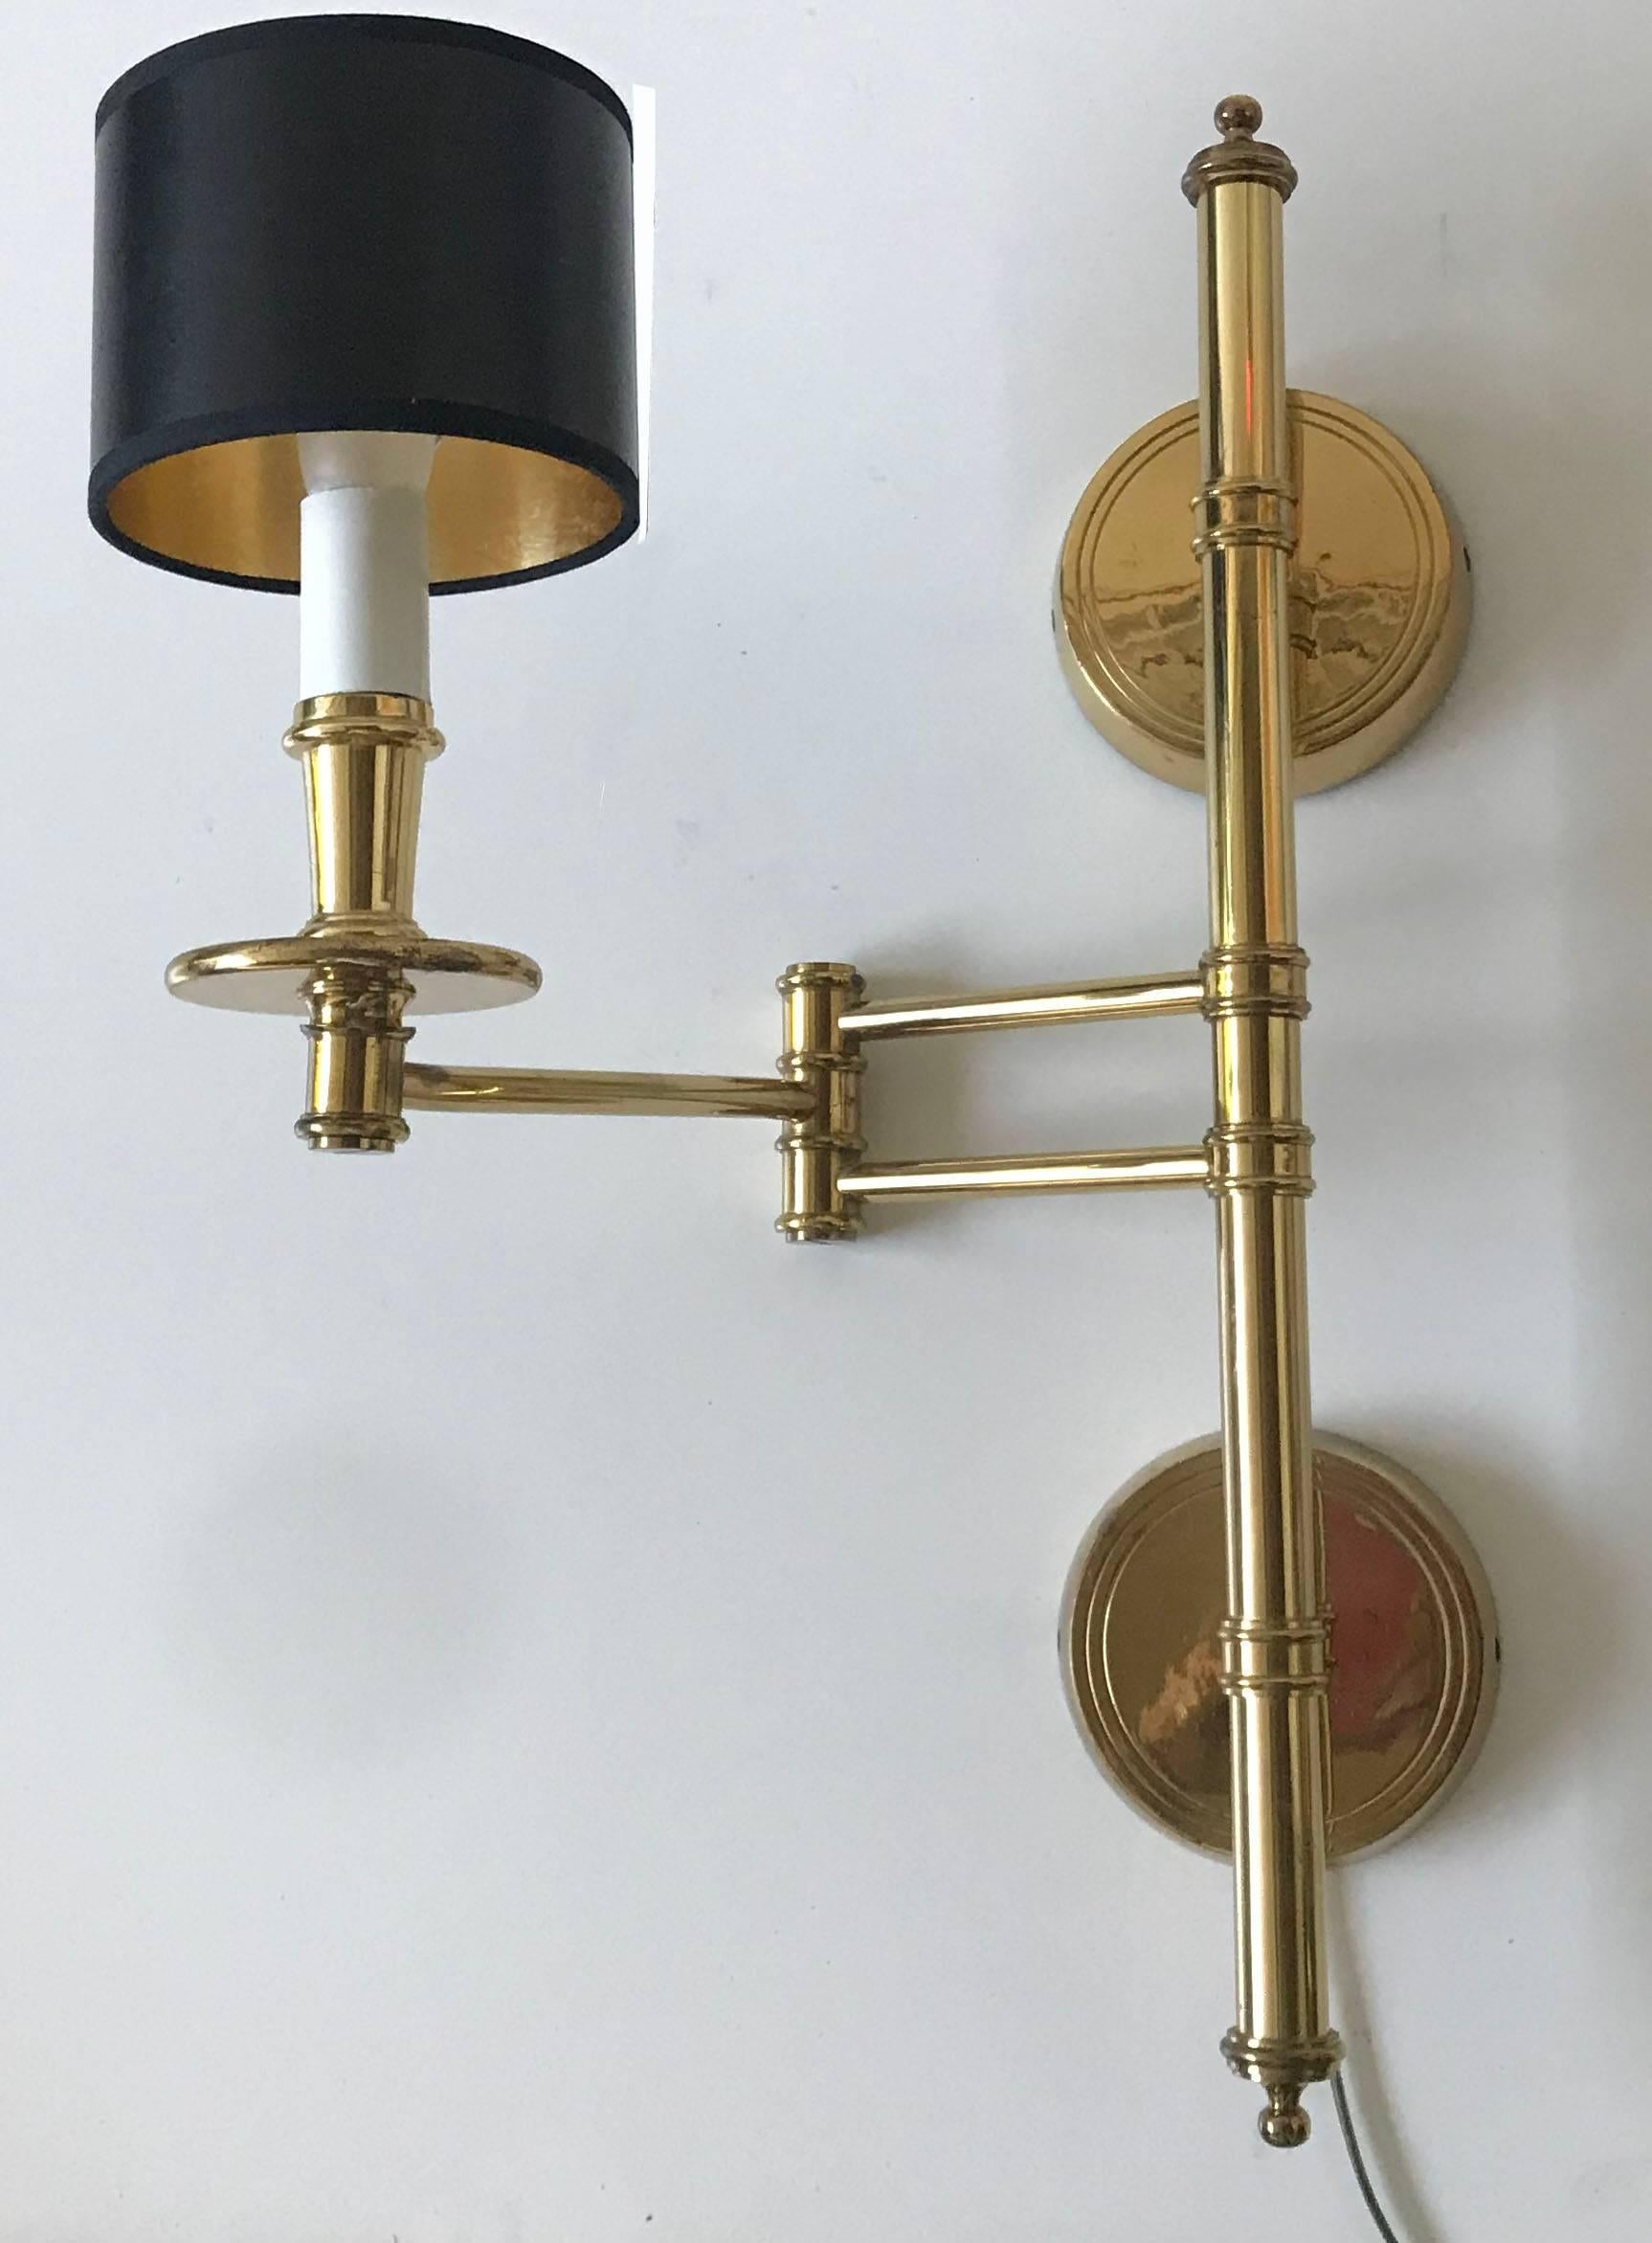 Superb pair of swing arm sconces 
$ 3450 for the pair of sconces
Measures: Closed 11 inches W, open 16 inches W.